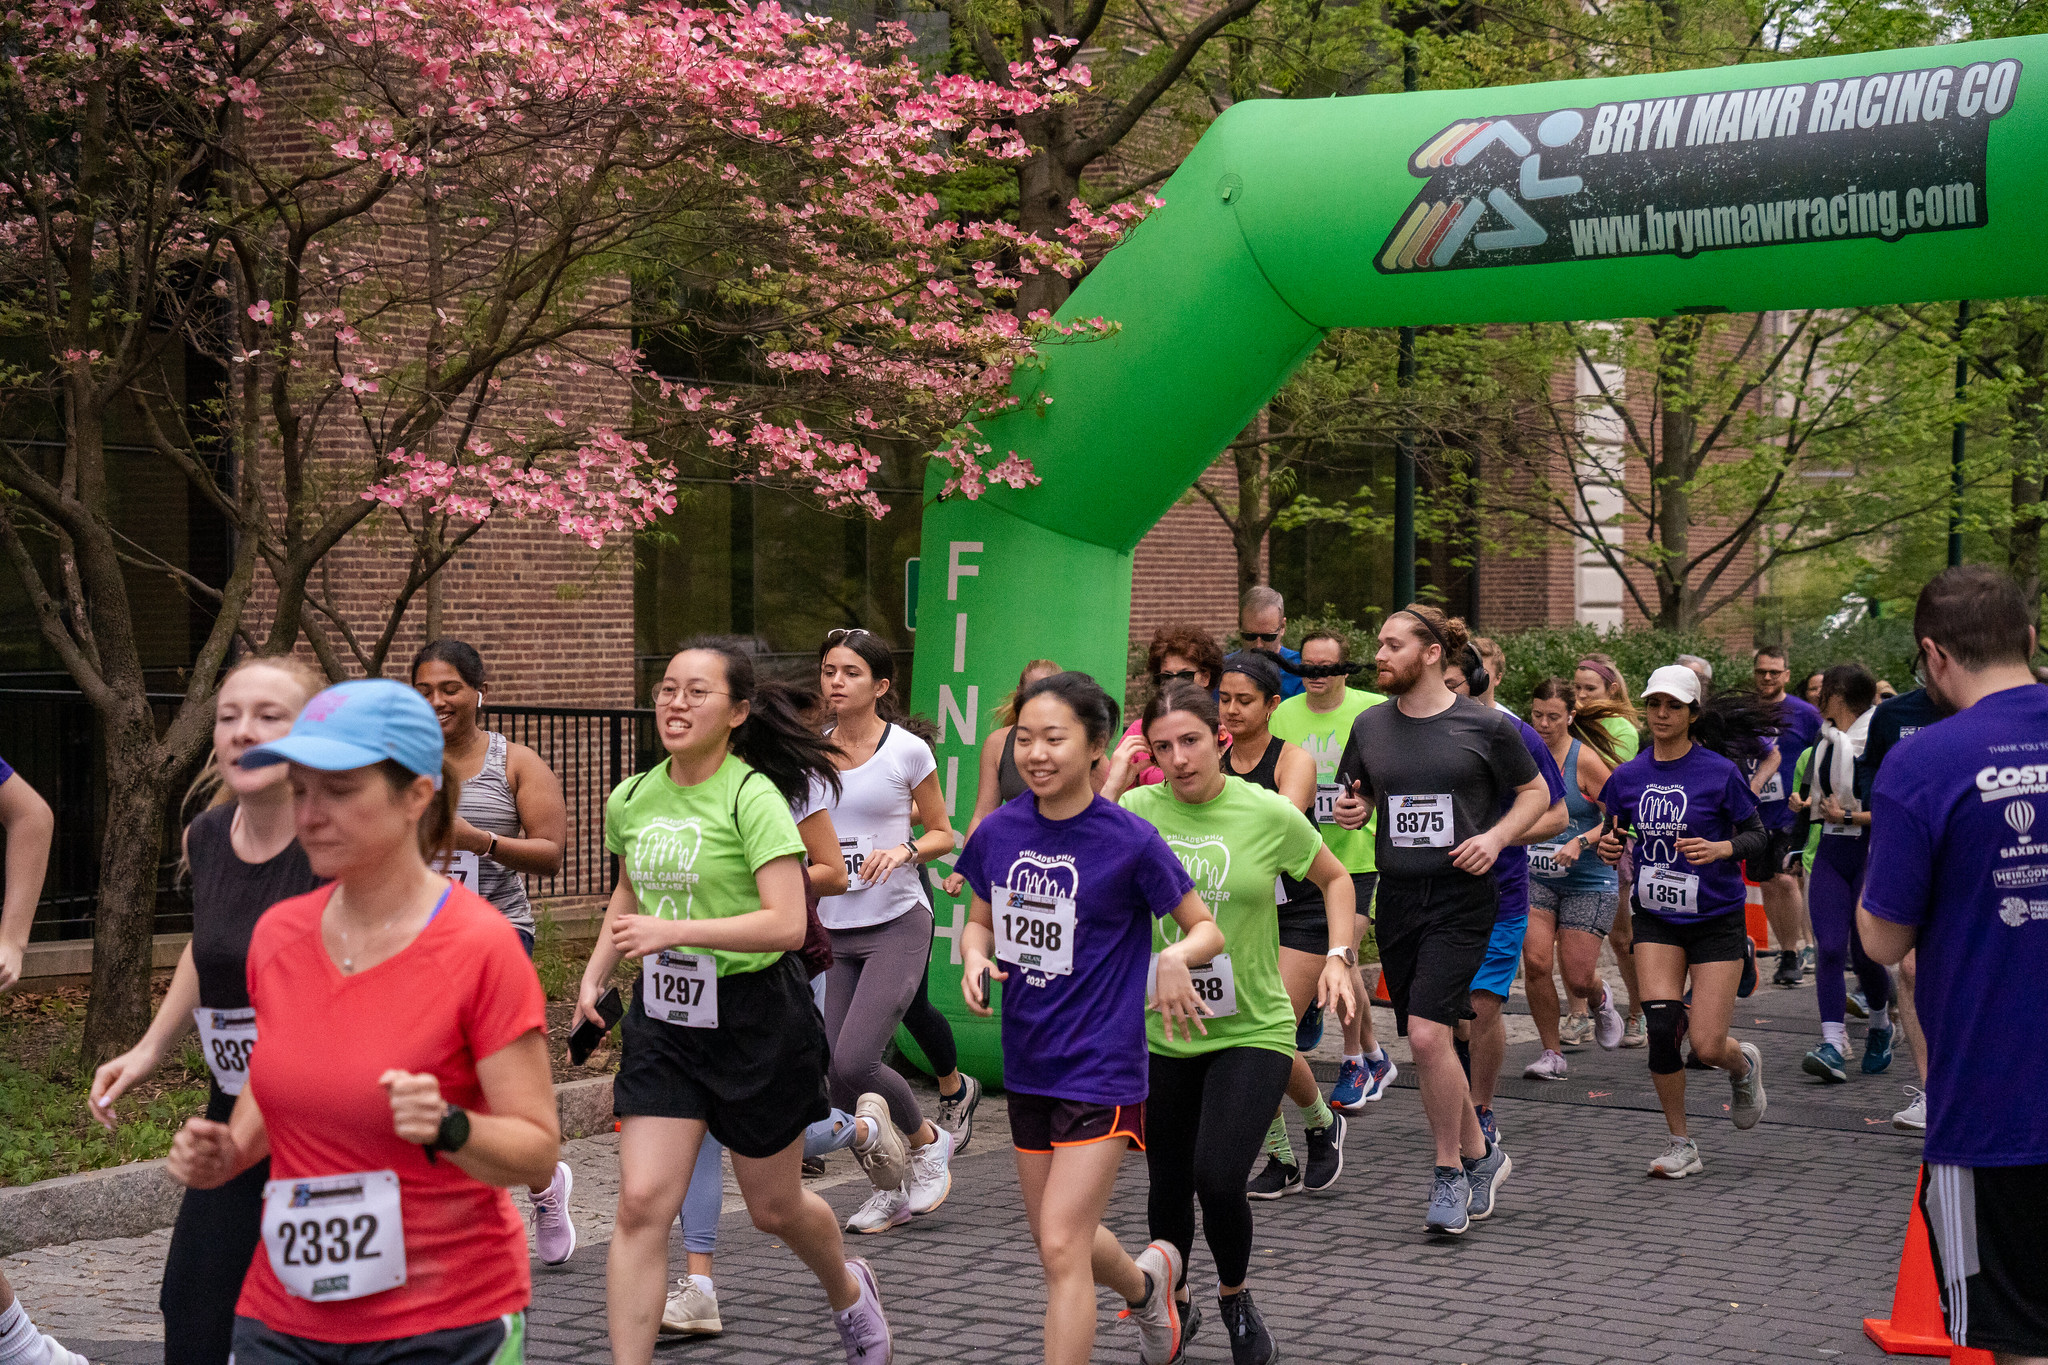 People participating in an organized 5k race